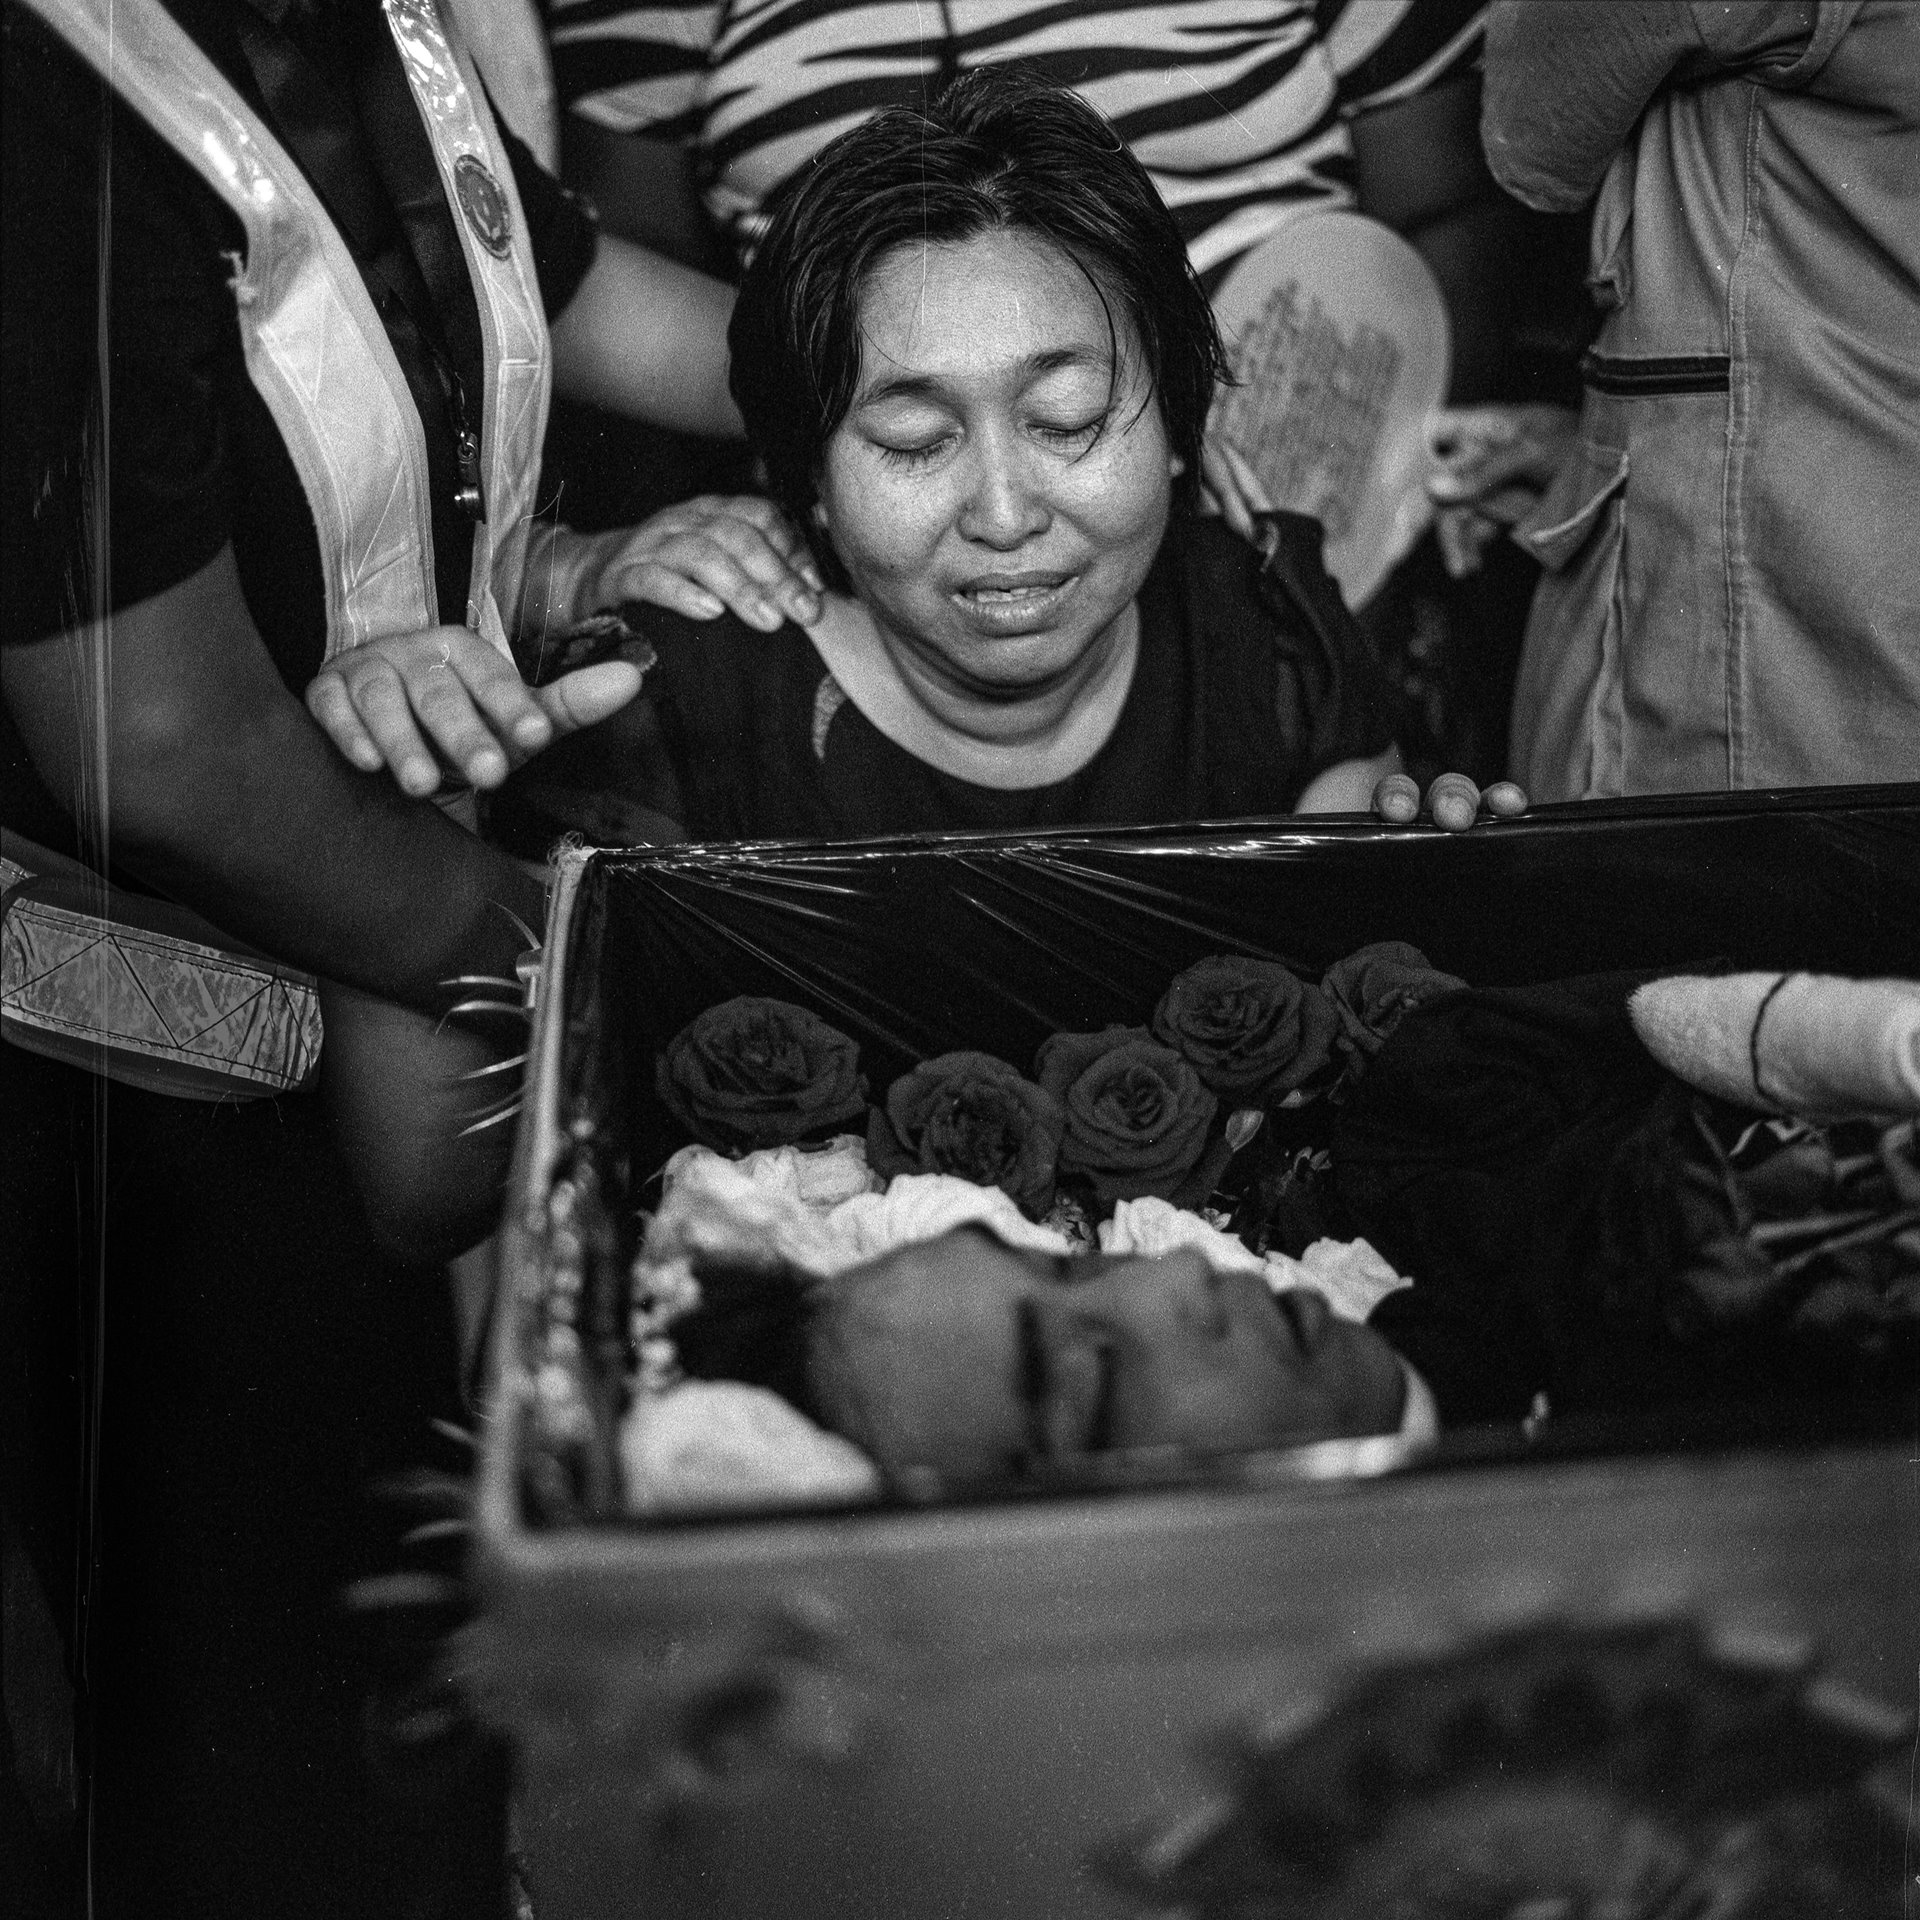 The mother of Chit Min Thu mourns during the funeral service in Yangon, Myanmar. Chit Min Thu was shot dead by security forces using live ammunition against protesters two days earlier.